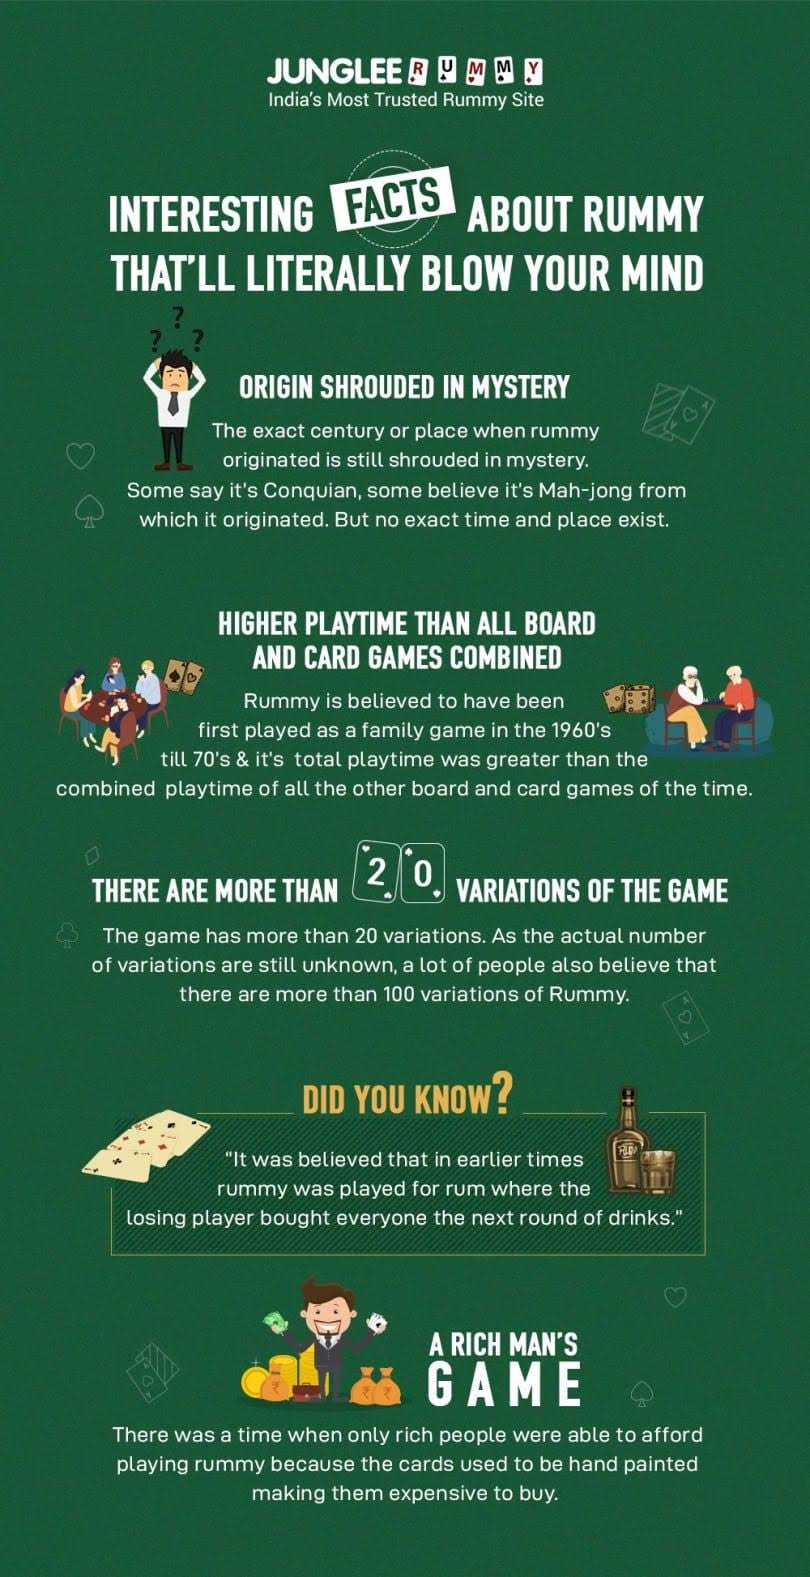 Interesting Facts About Rummy That’ll Literally Blow Your Mind #infographic